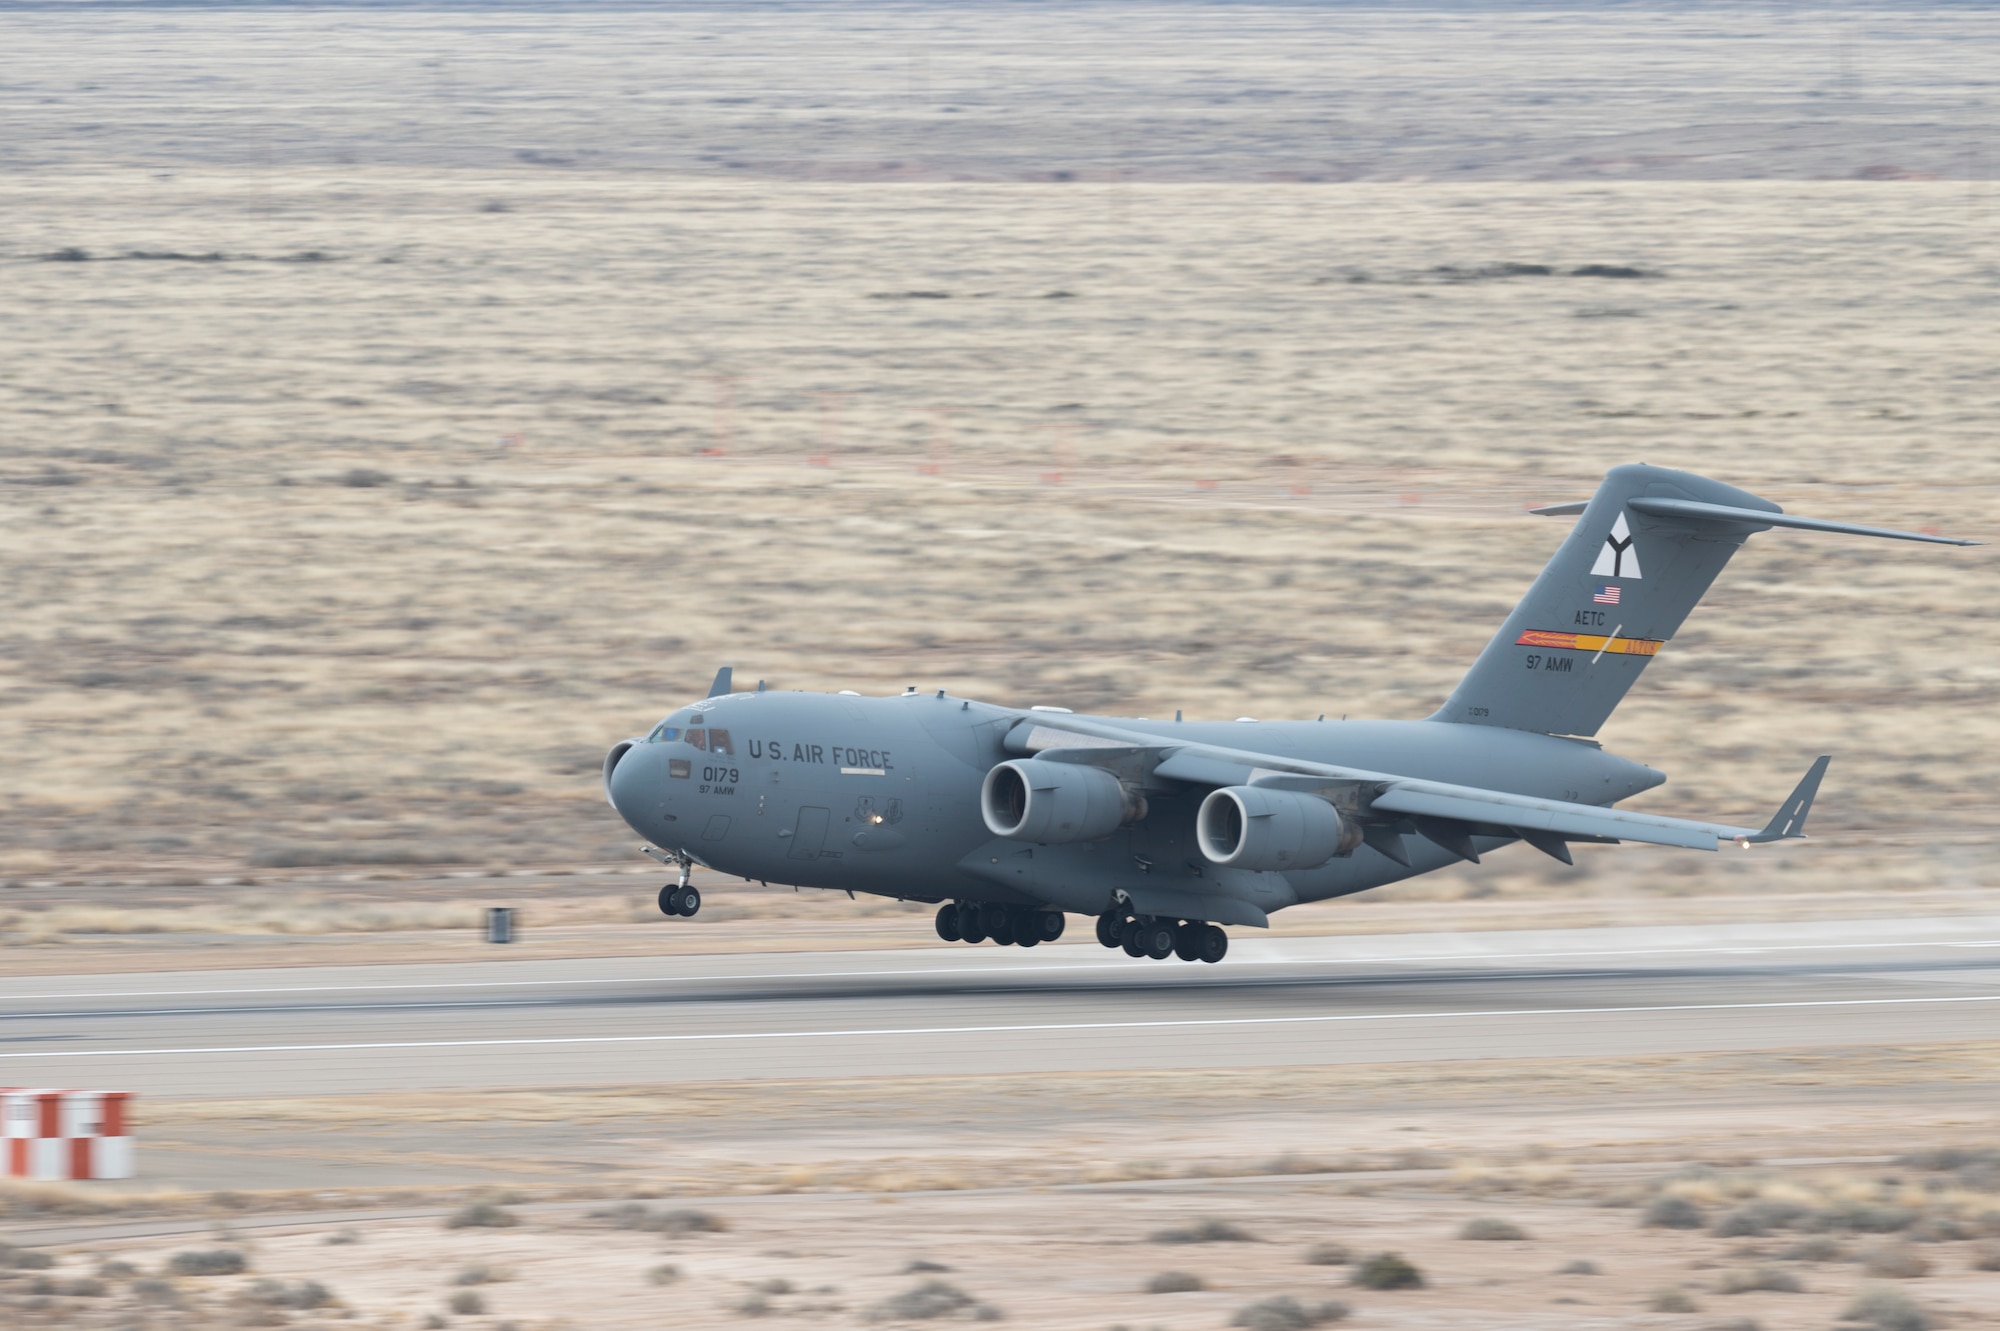 A C-17 Globemaster III assigned to the 97th Air Mobility Wing at Altus Air Force Base, Oklahoma, lands at Holloman AFB, New Mexico, March 2, 2023